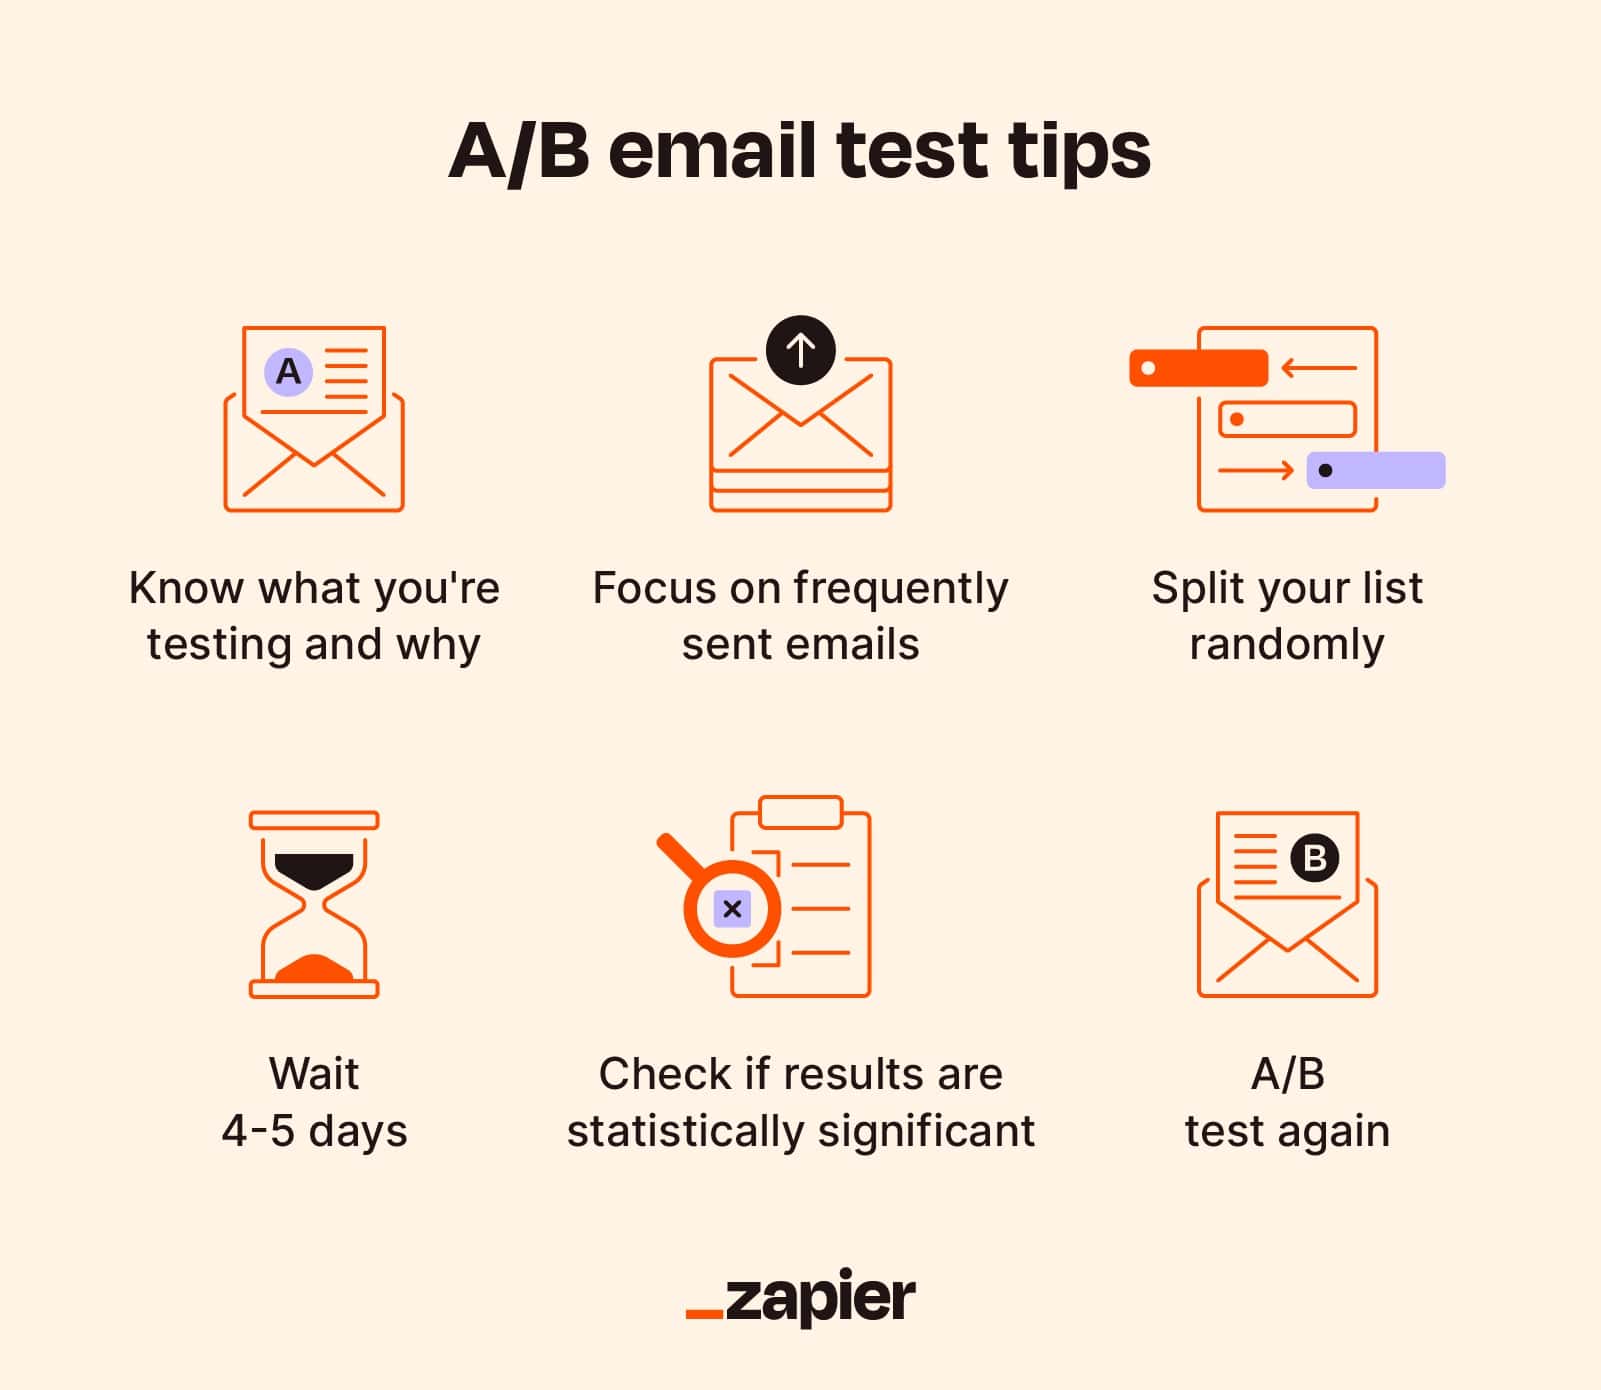 ab-email-test-tips